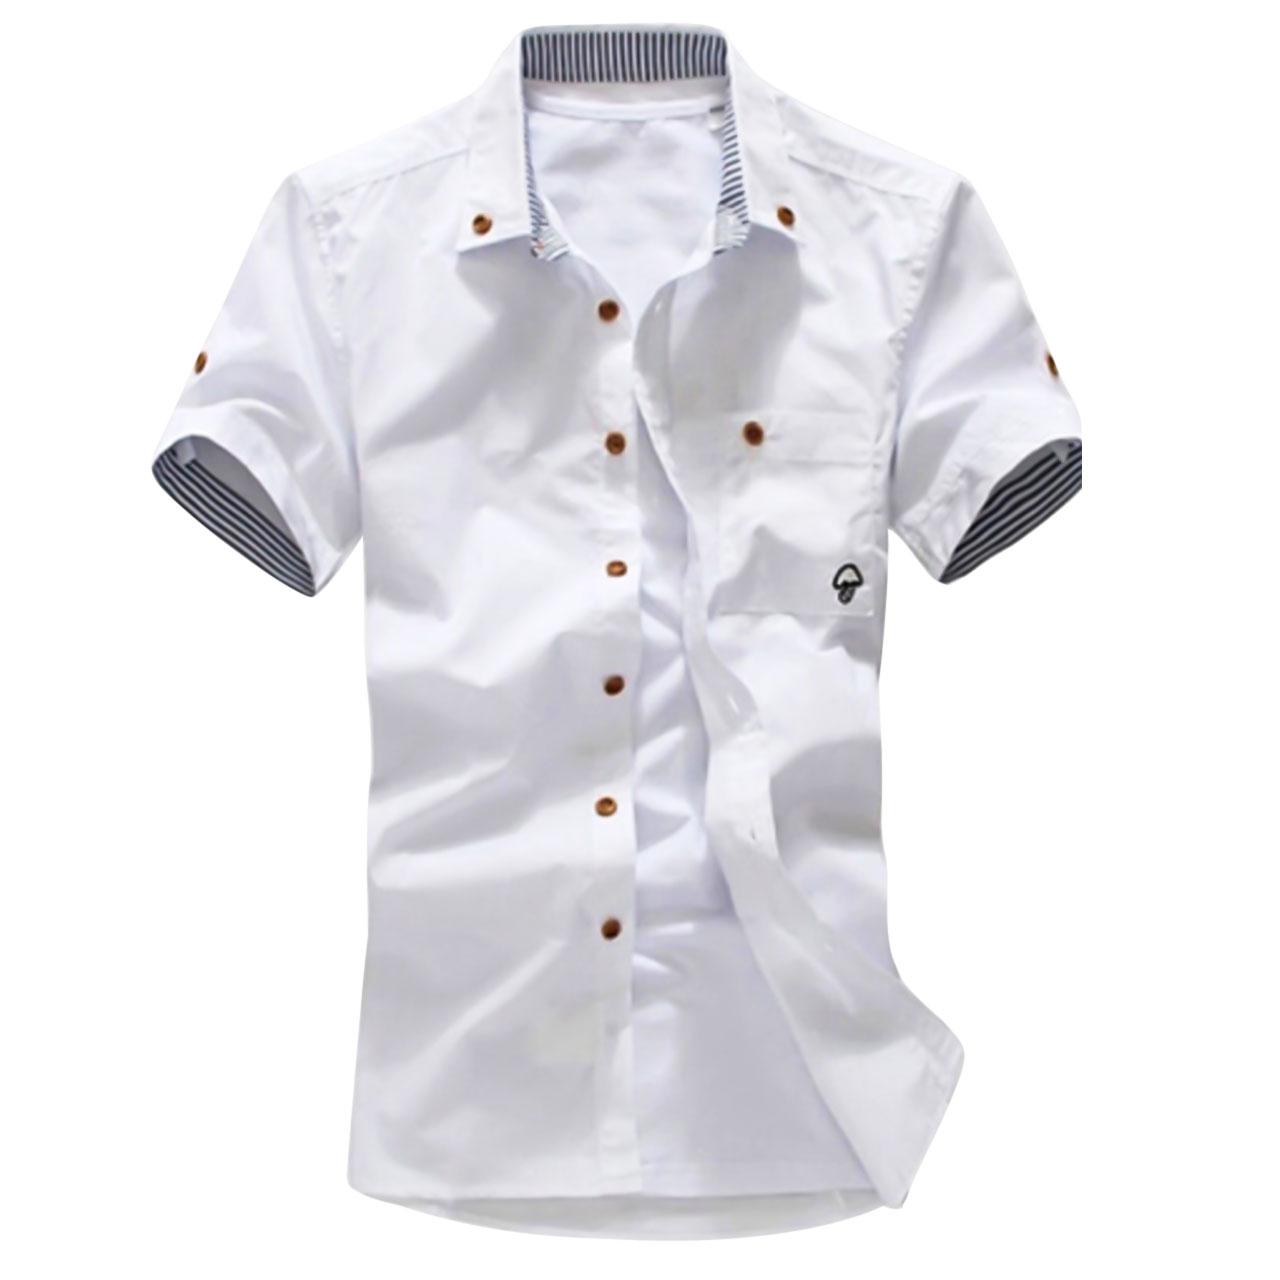 Solid Colored Plus Size White Button Down Shirt Short Sleeve